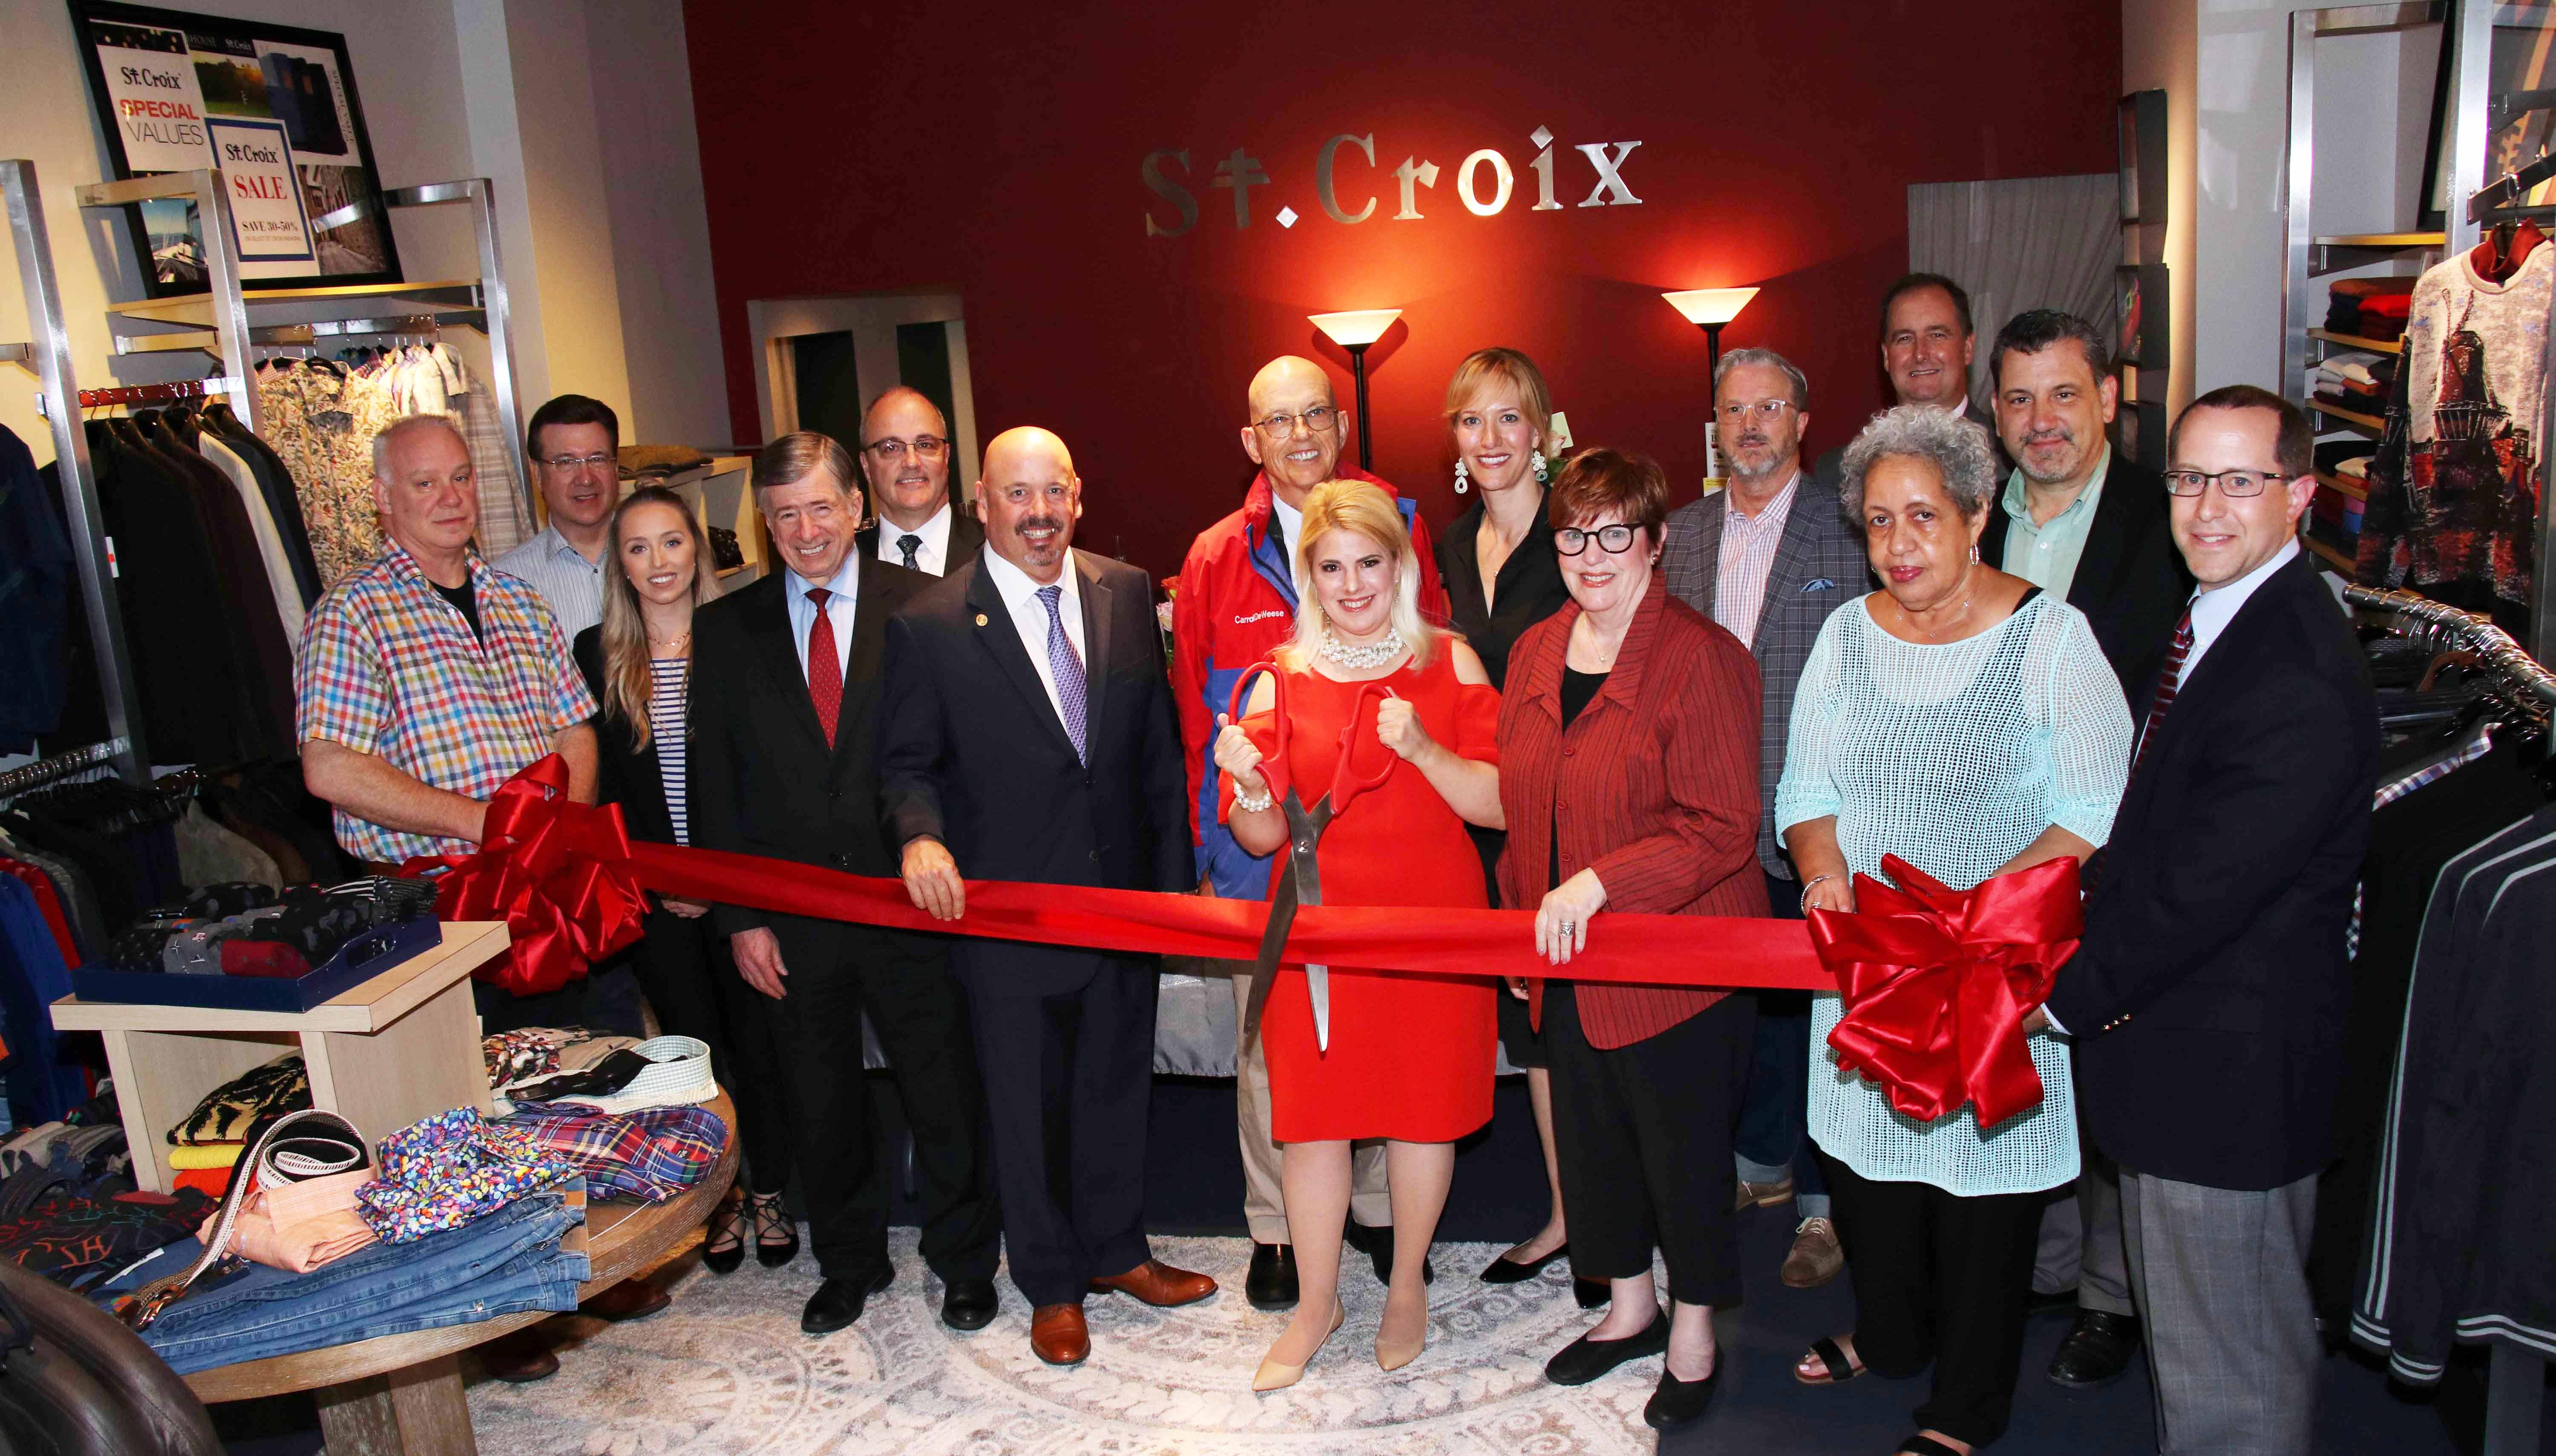 BBCC hosts ribbon cutting for St. Croix Shop - Birmingham-Bloomfield  Chamber of Commerce